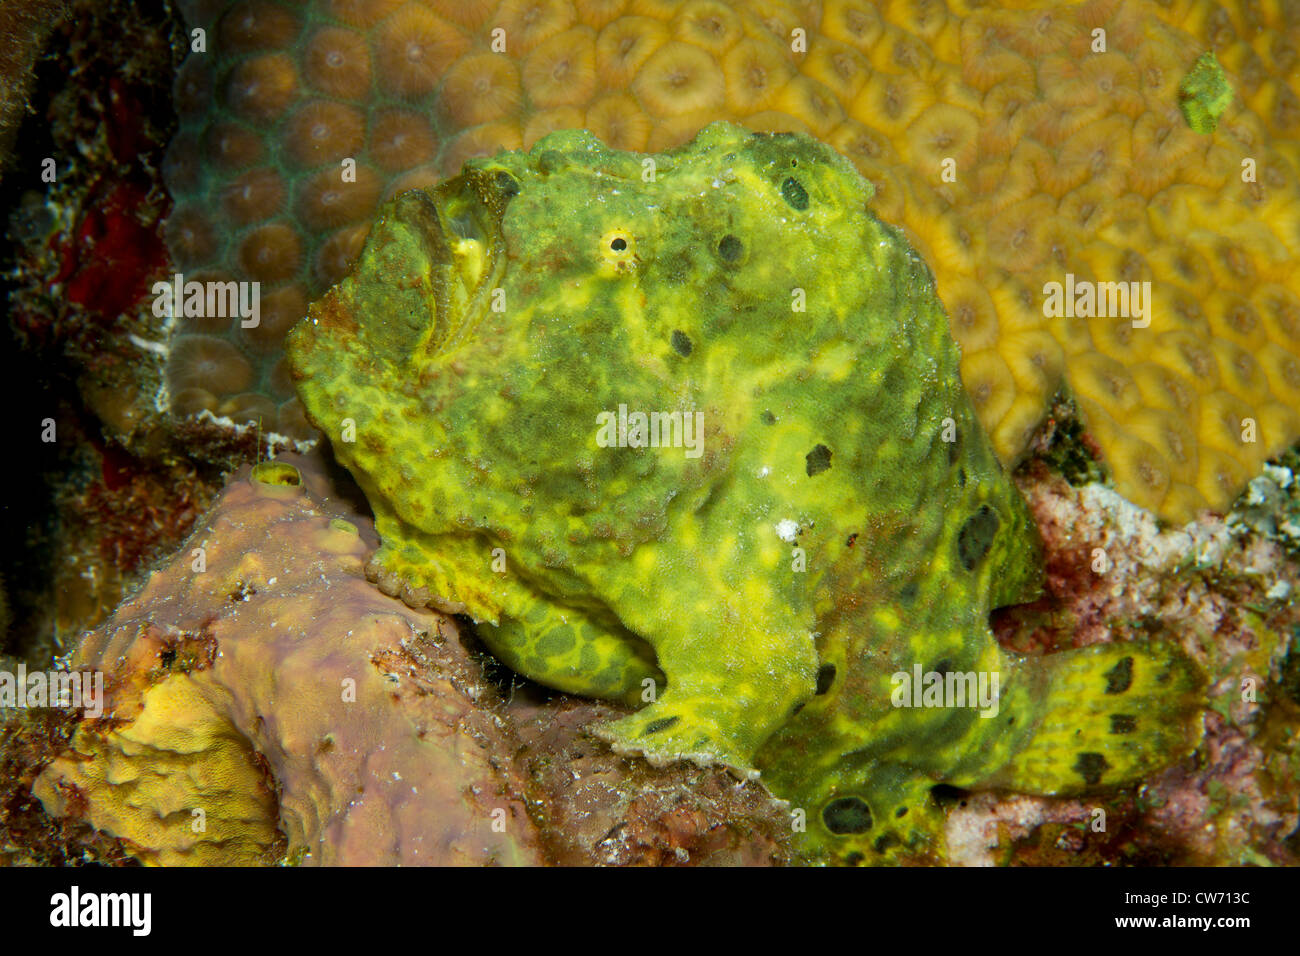 Closeup of longlure frogfish on coral reef Stock Photo